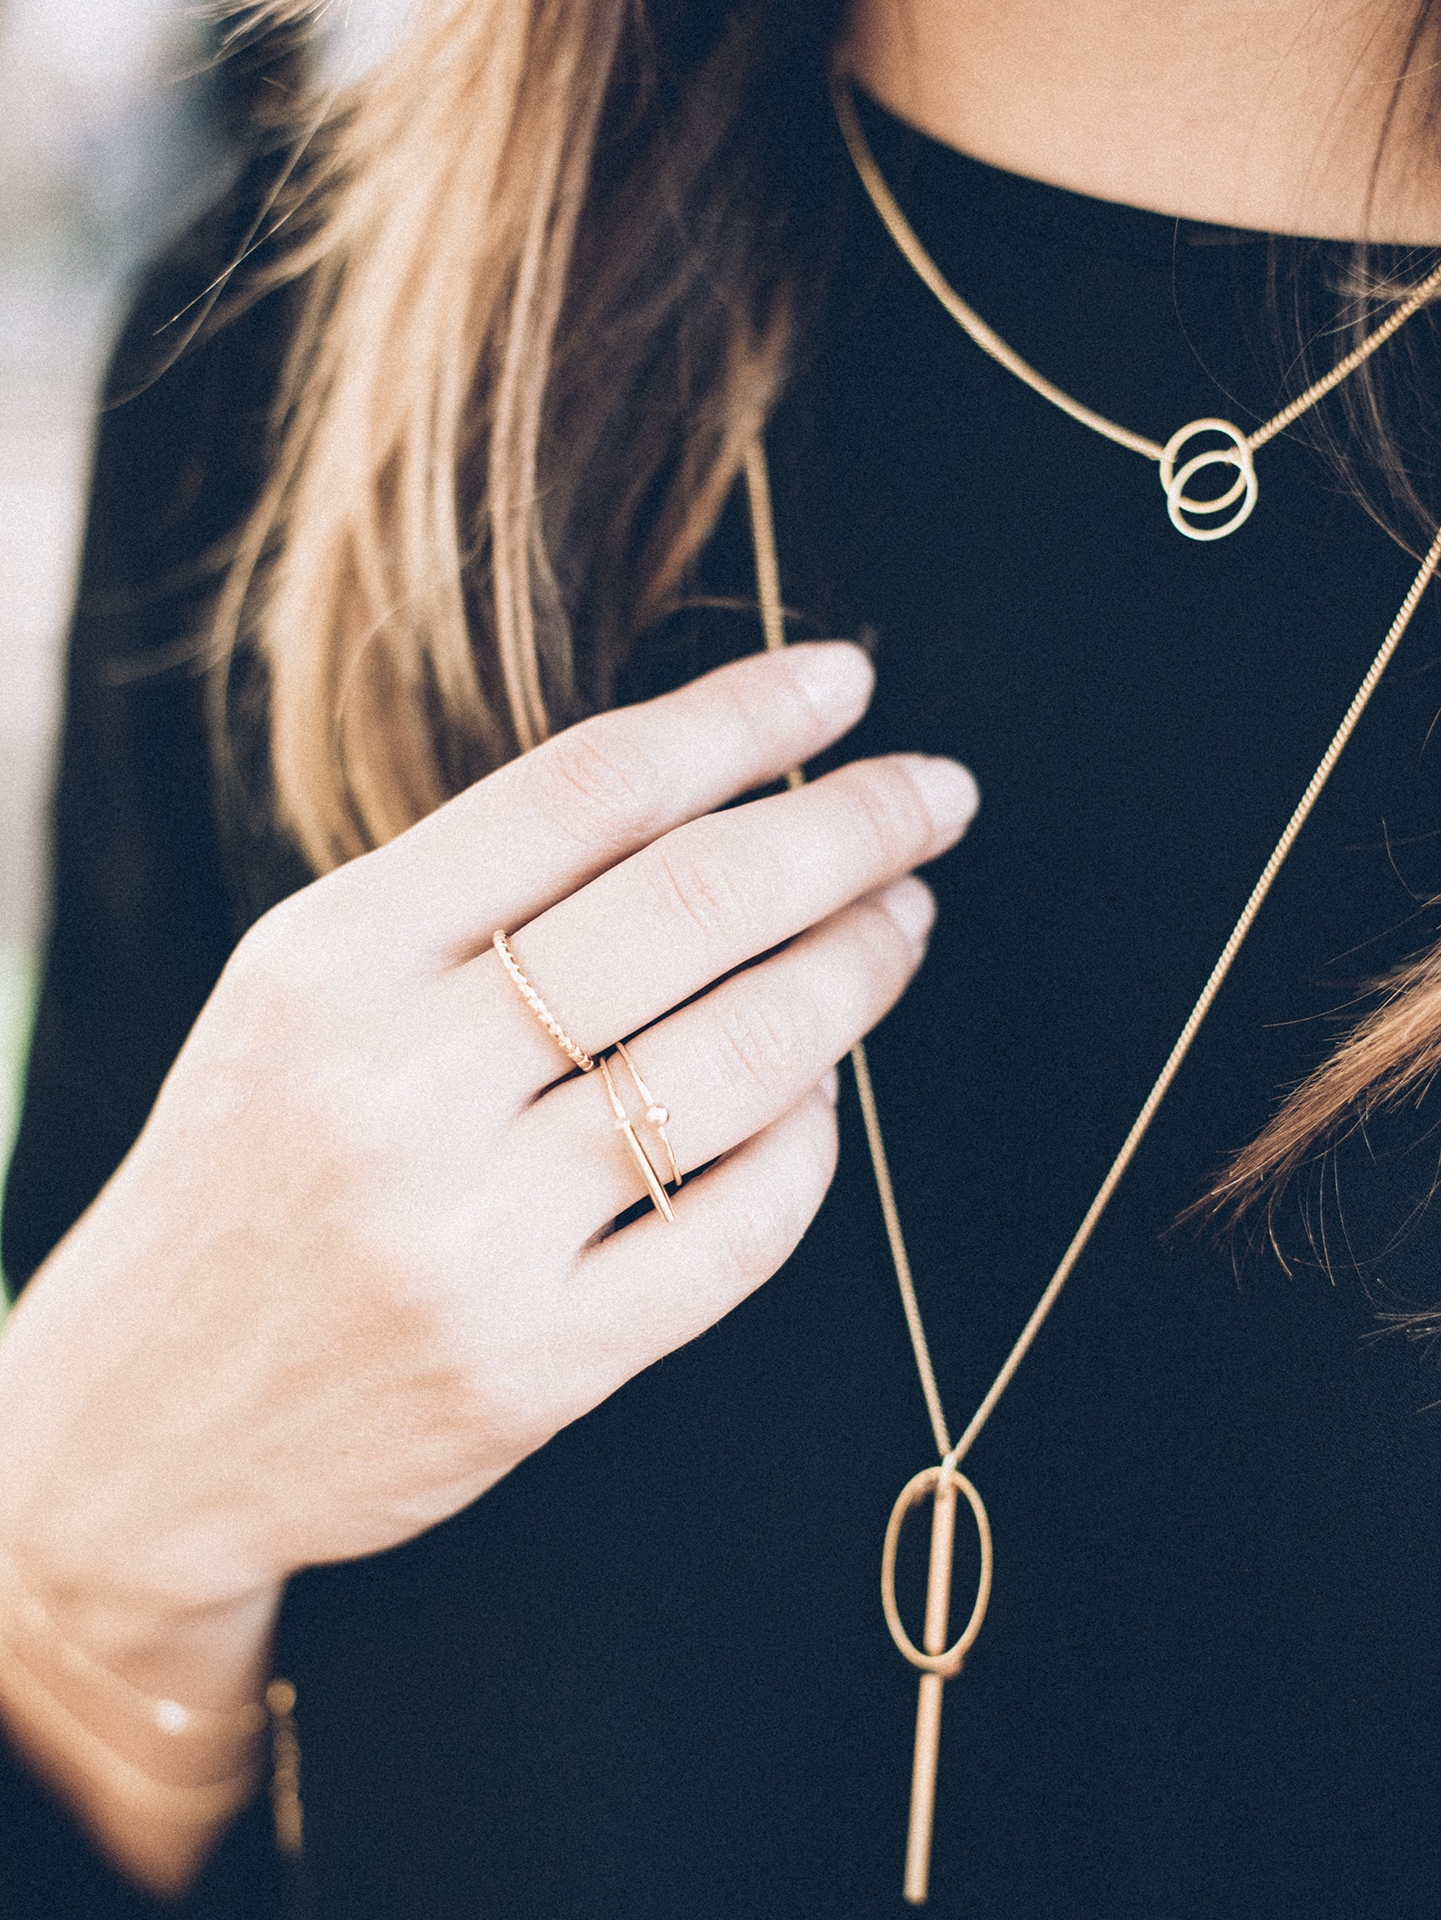 5 Jewelry Styling Tips You Should Know